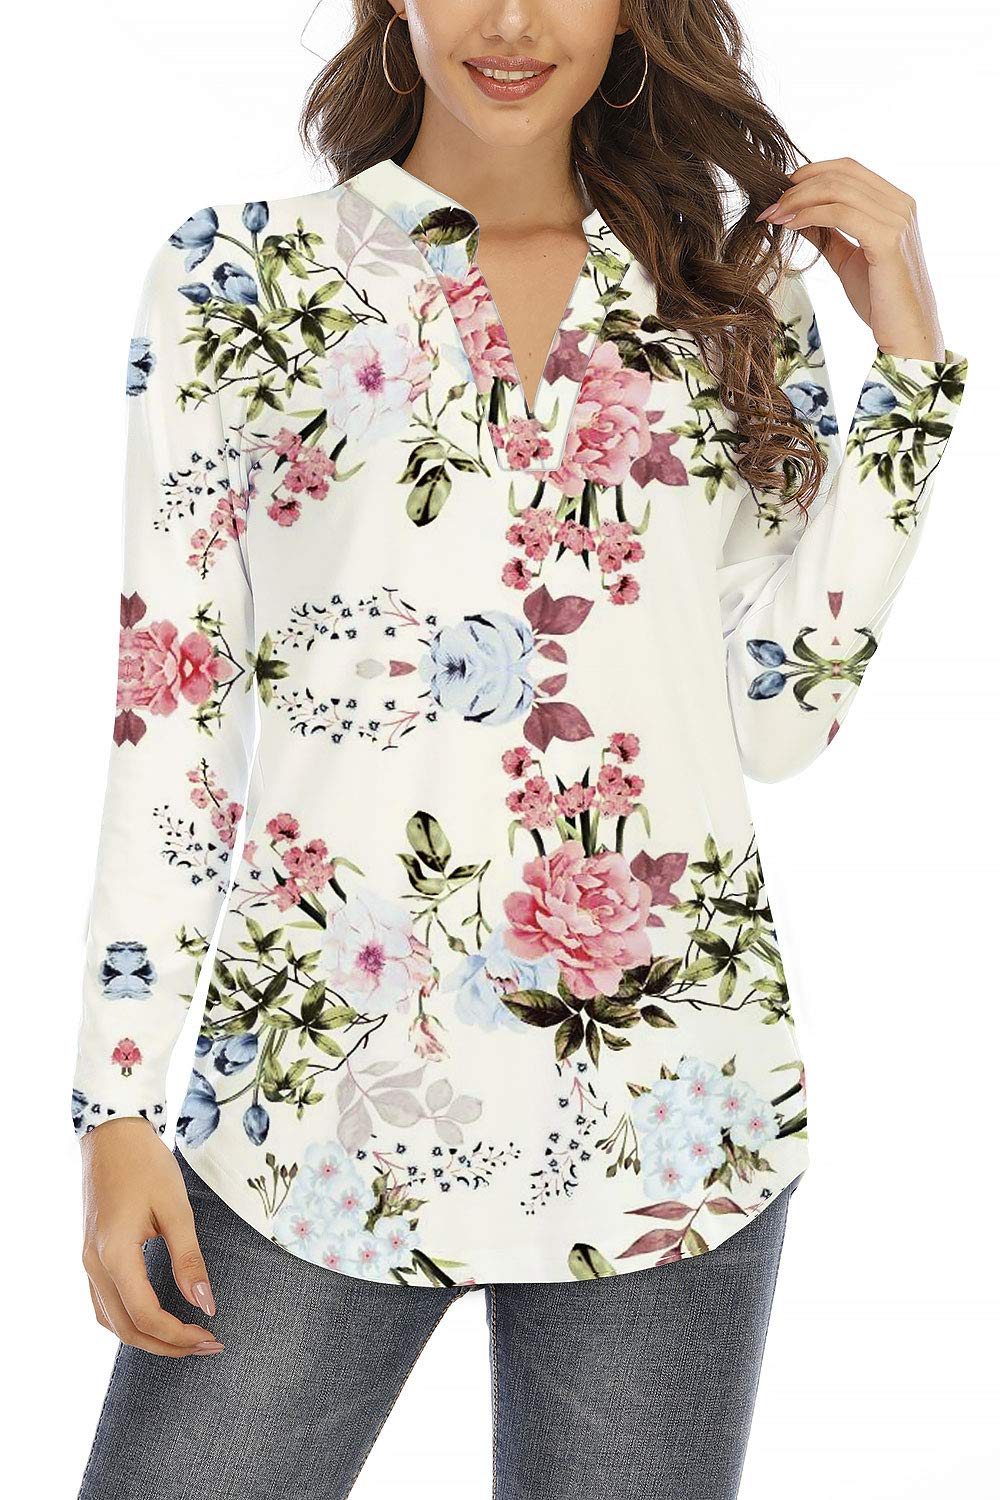 Beauhuty Womens Tops V Neck Blouses Floral Printed Casual Short/Long Sleeve Tunic Shirts